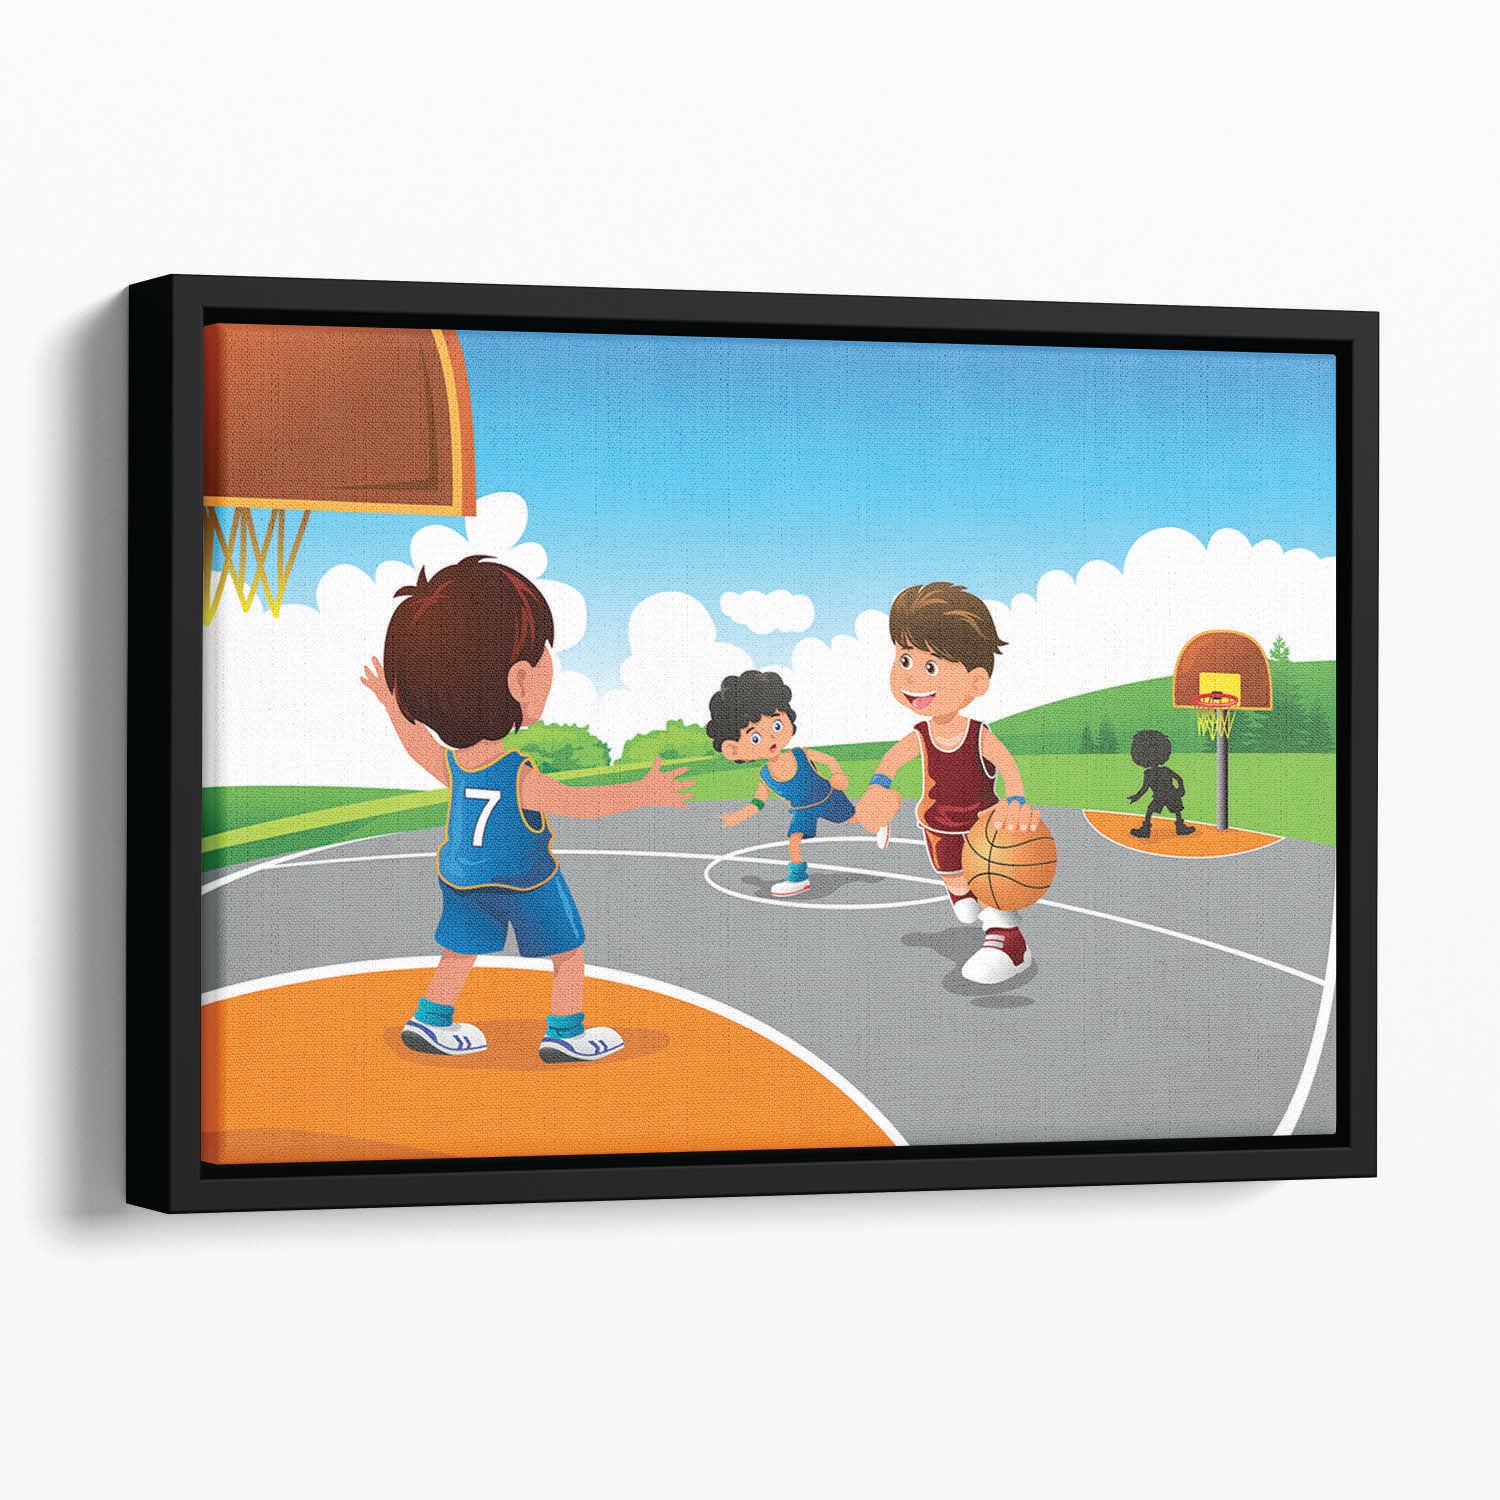 Kids playing basketball in a playground Floating Framed Canvas